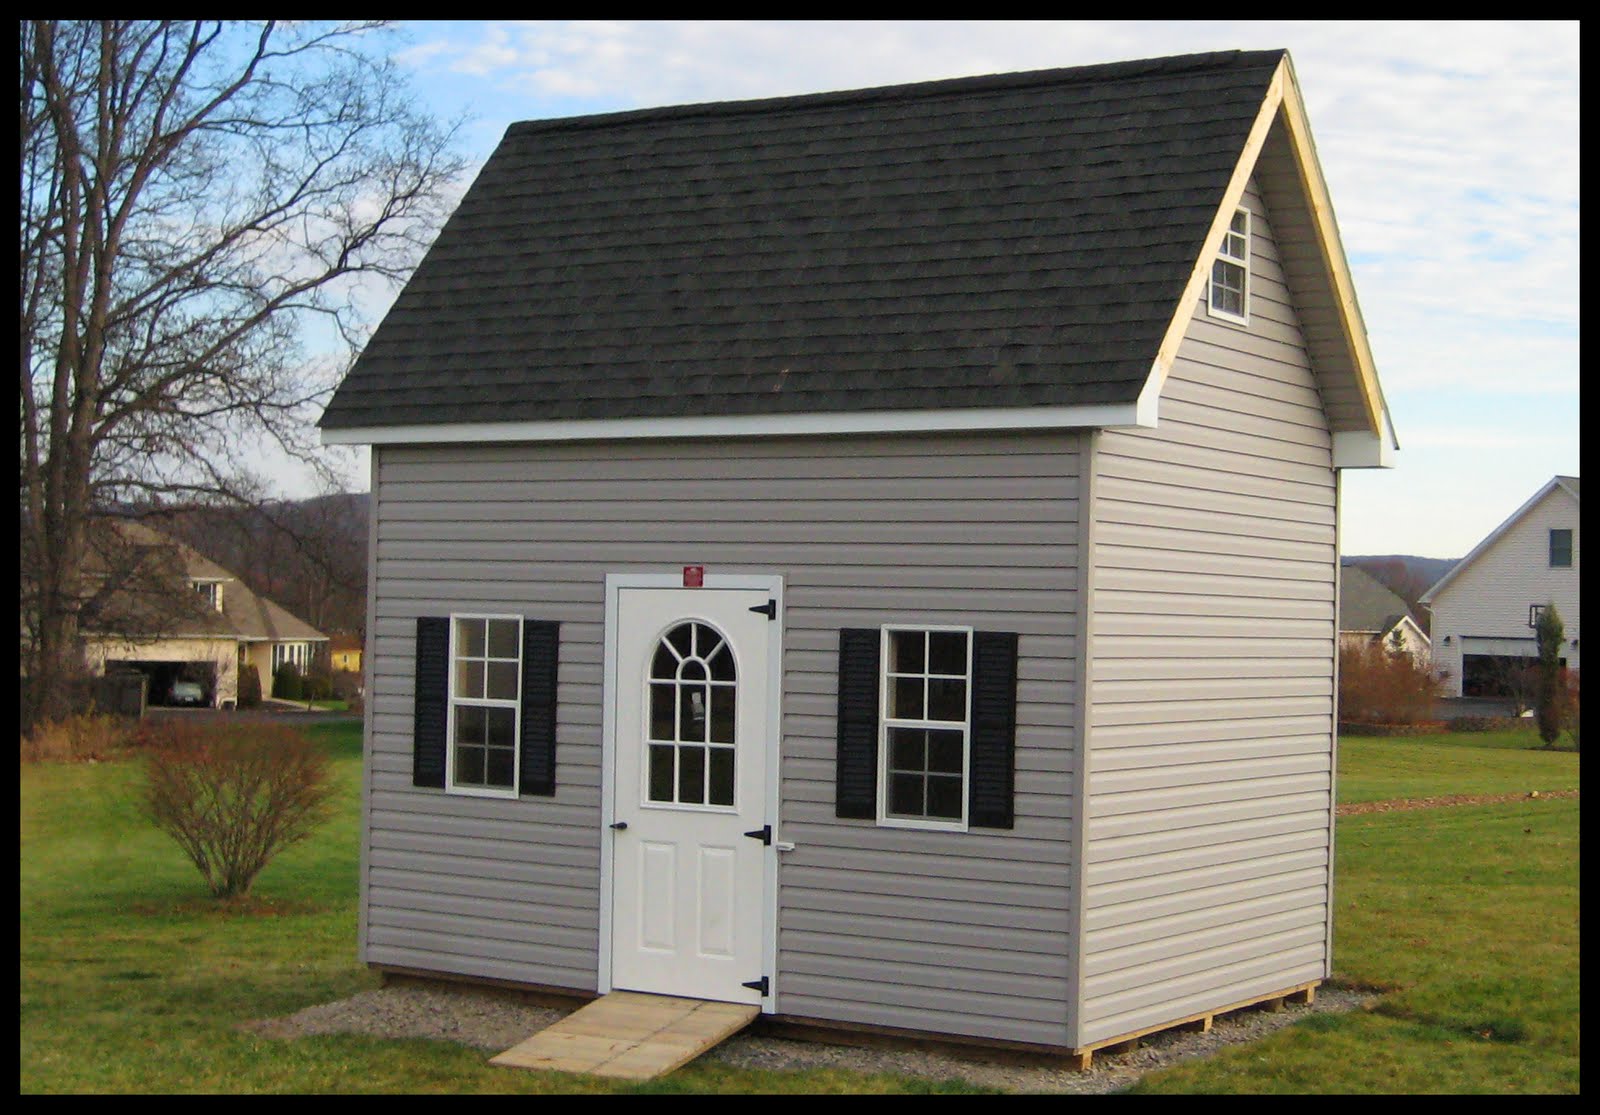 15 Best Two Story Shed Designs - Home Plans &amp; Blueprints